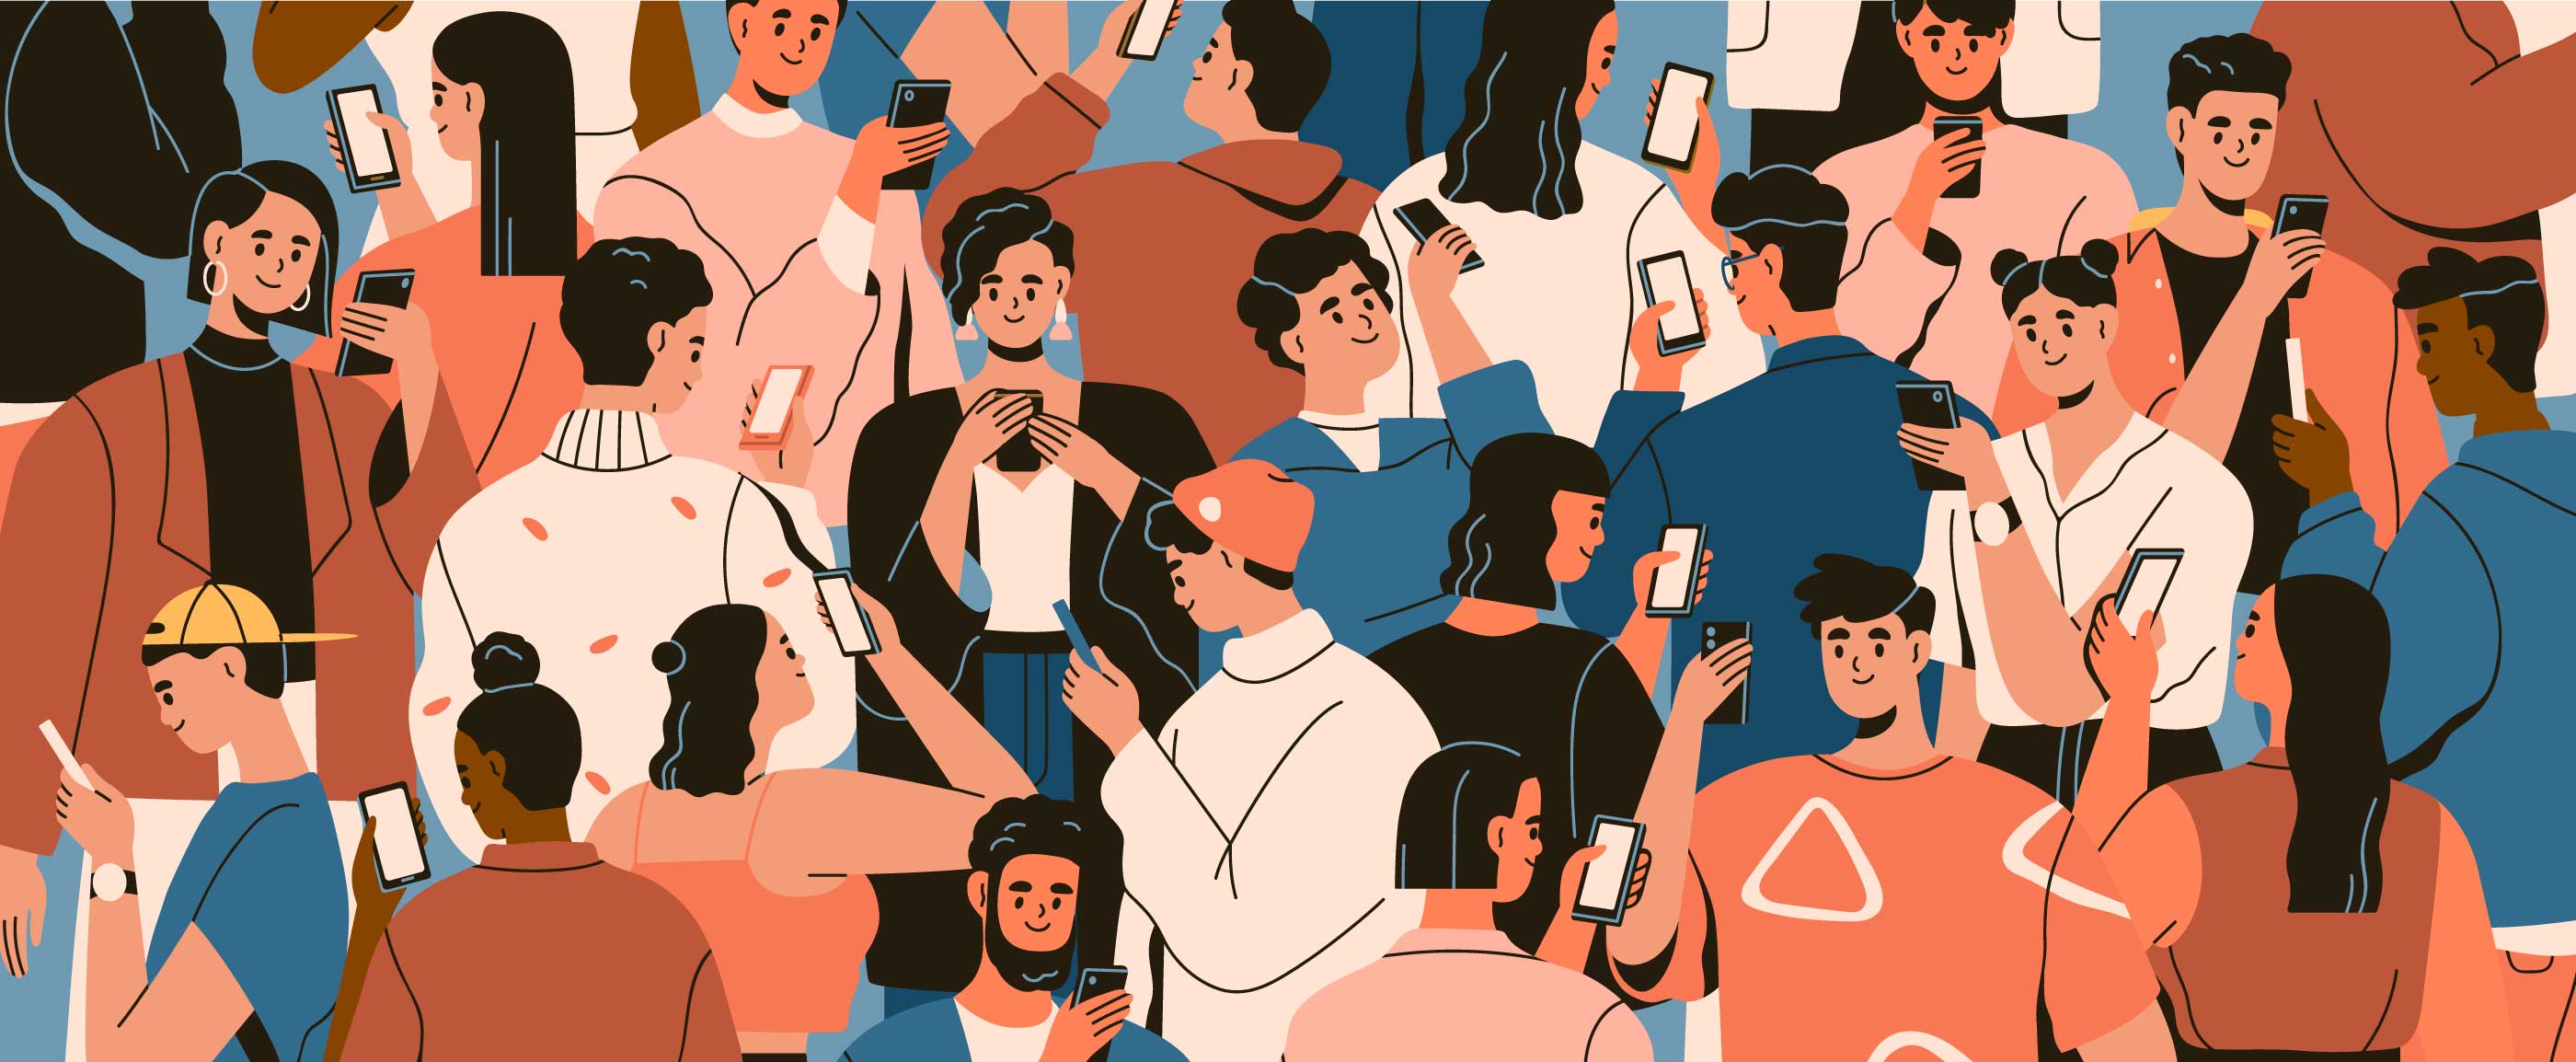 A funky illustration of a group of young people on their phones. 